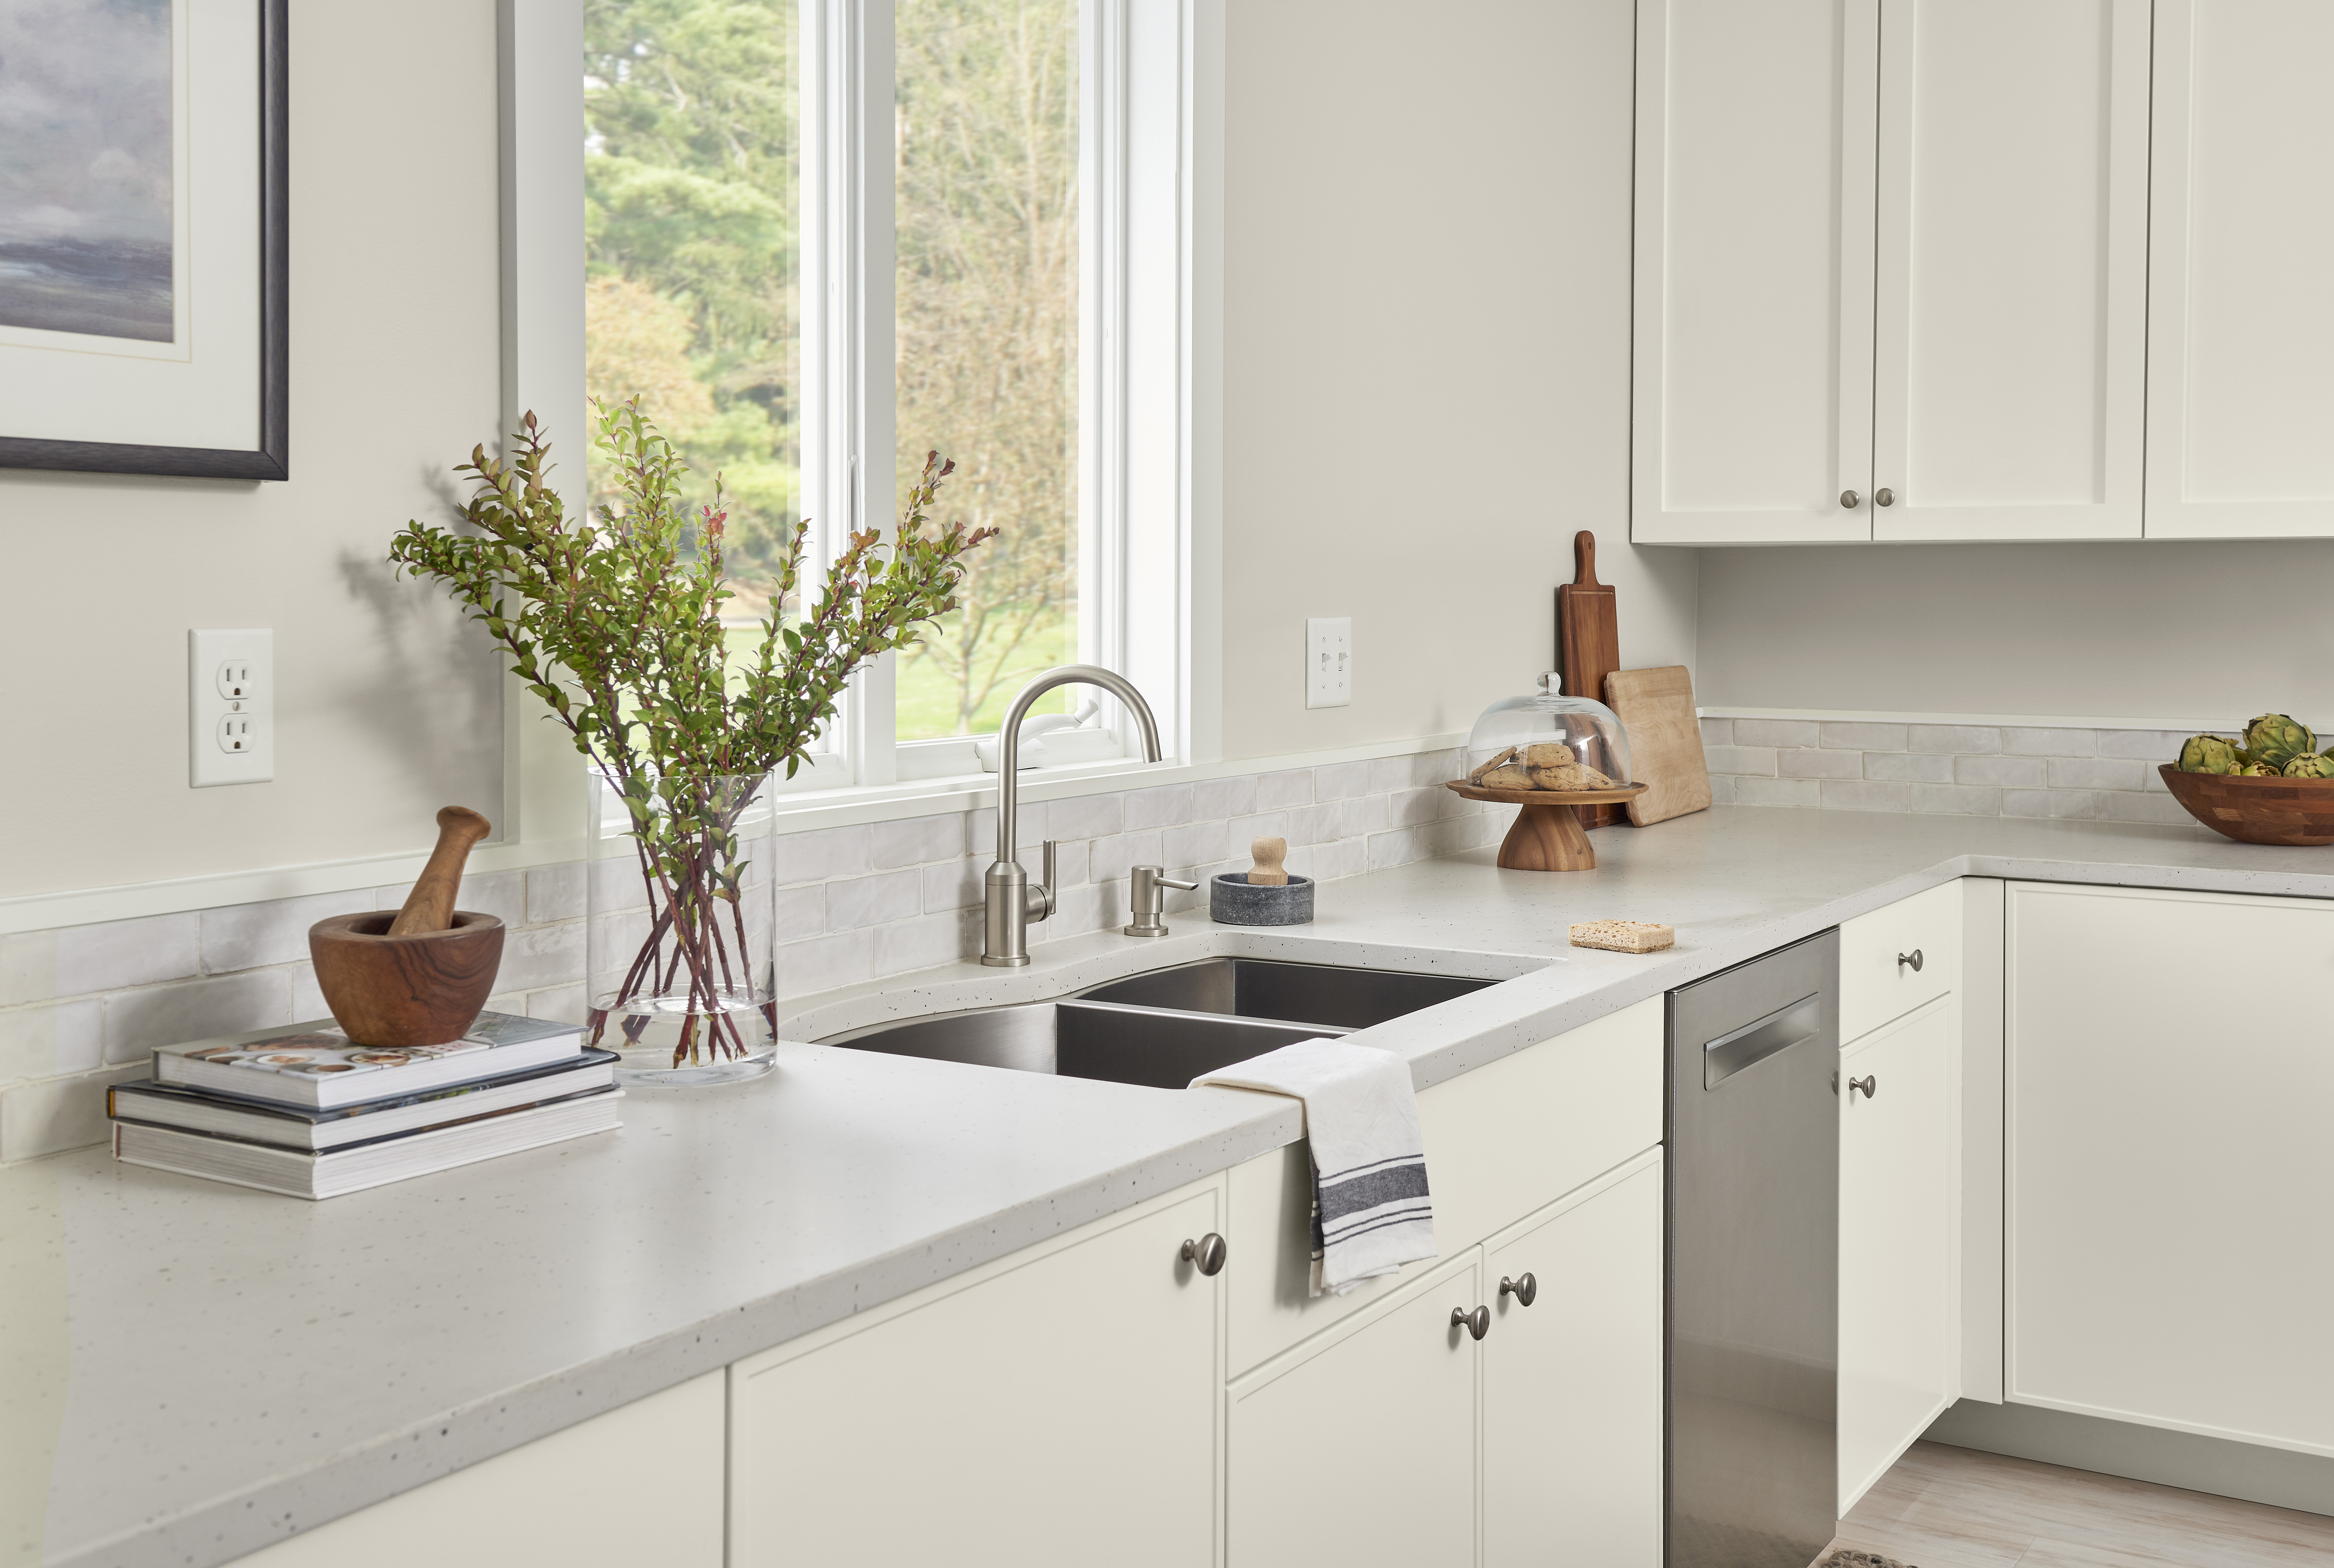 A bright and airy kitchen with walls painted in Tranquil Gray and trim in Natural White